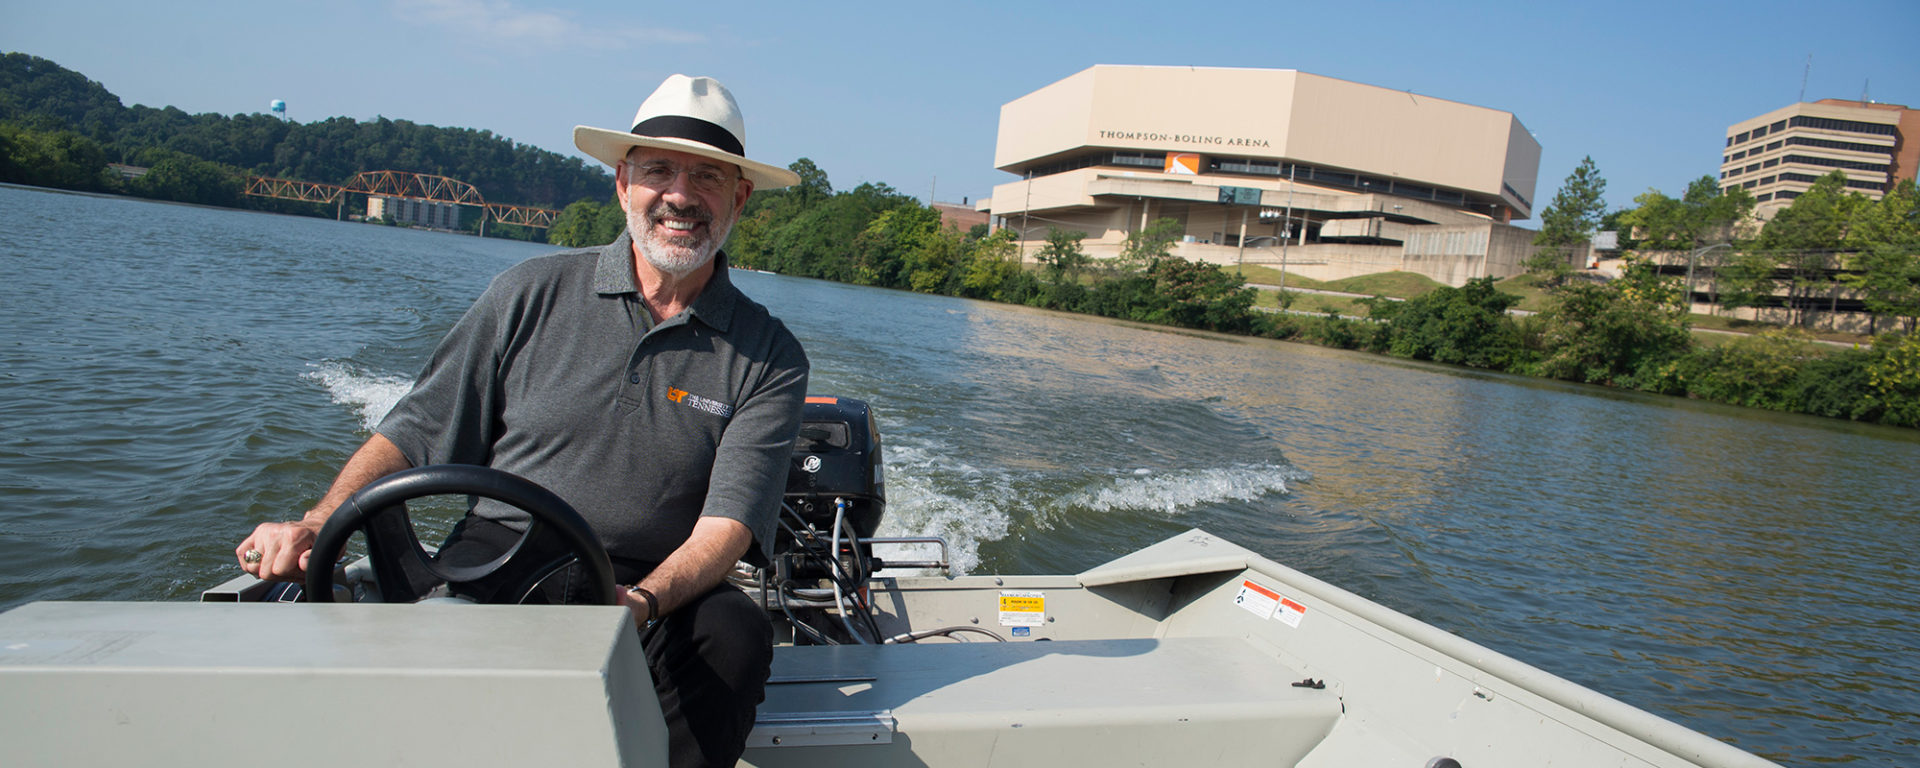 President Joe DiPietro explores the Tennessee River near campus on a boat courtesy of UT Rowing in Knoxville.